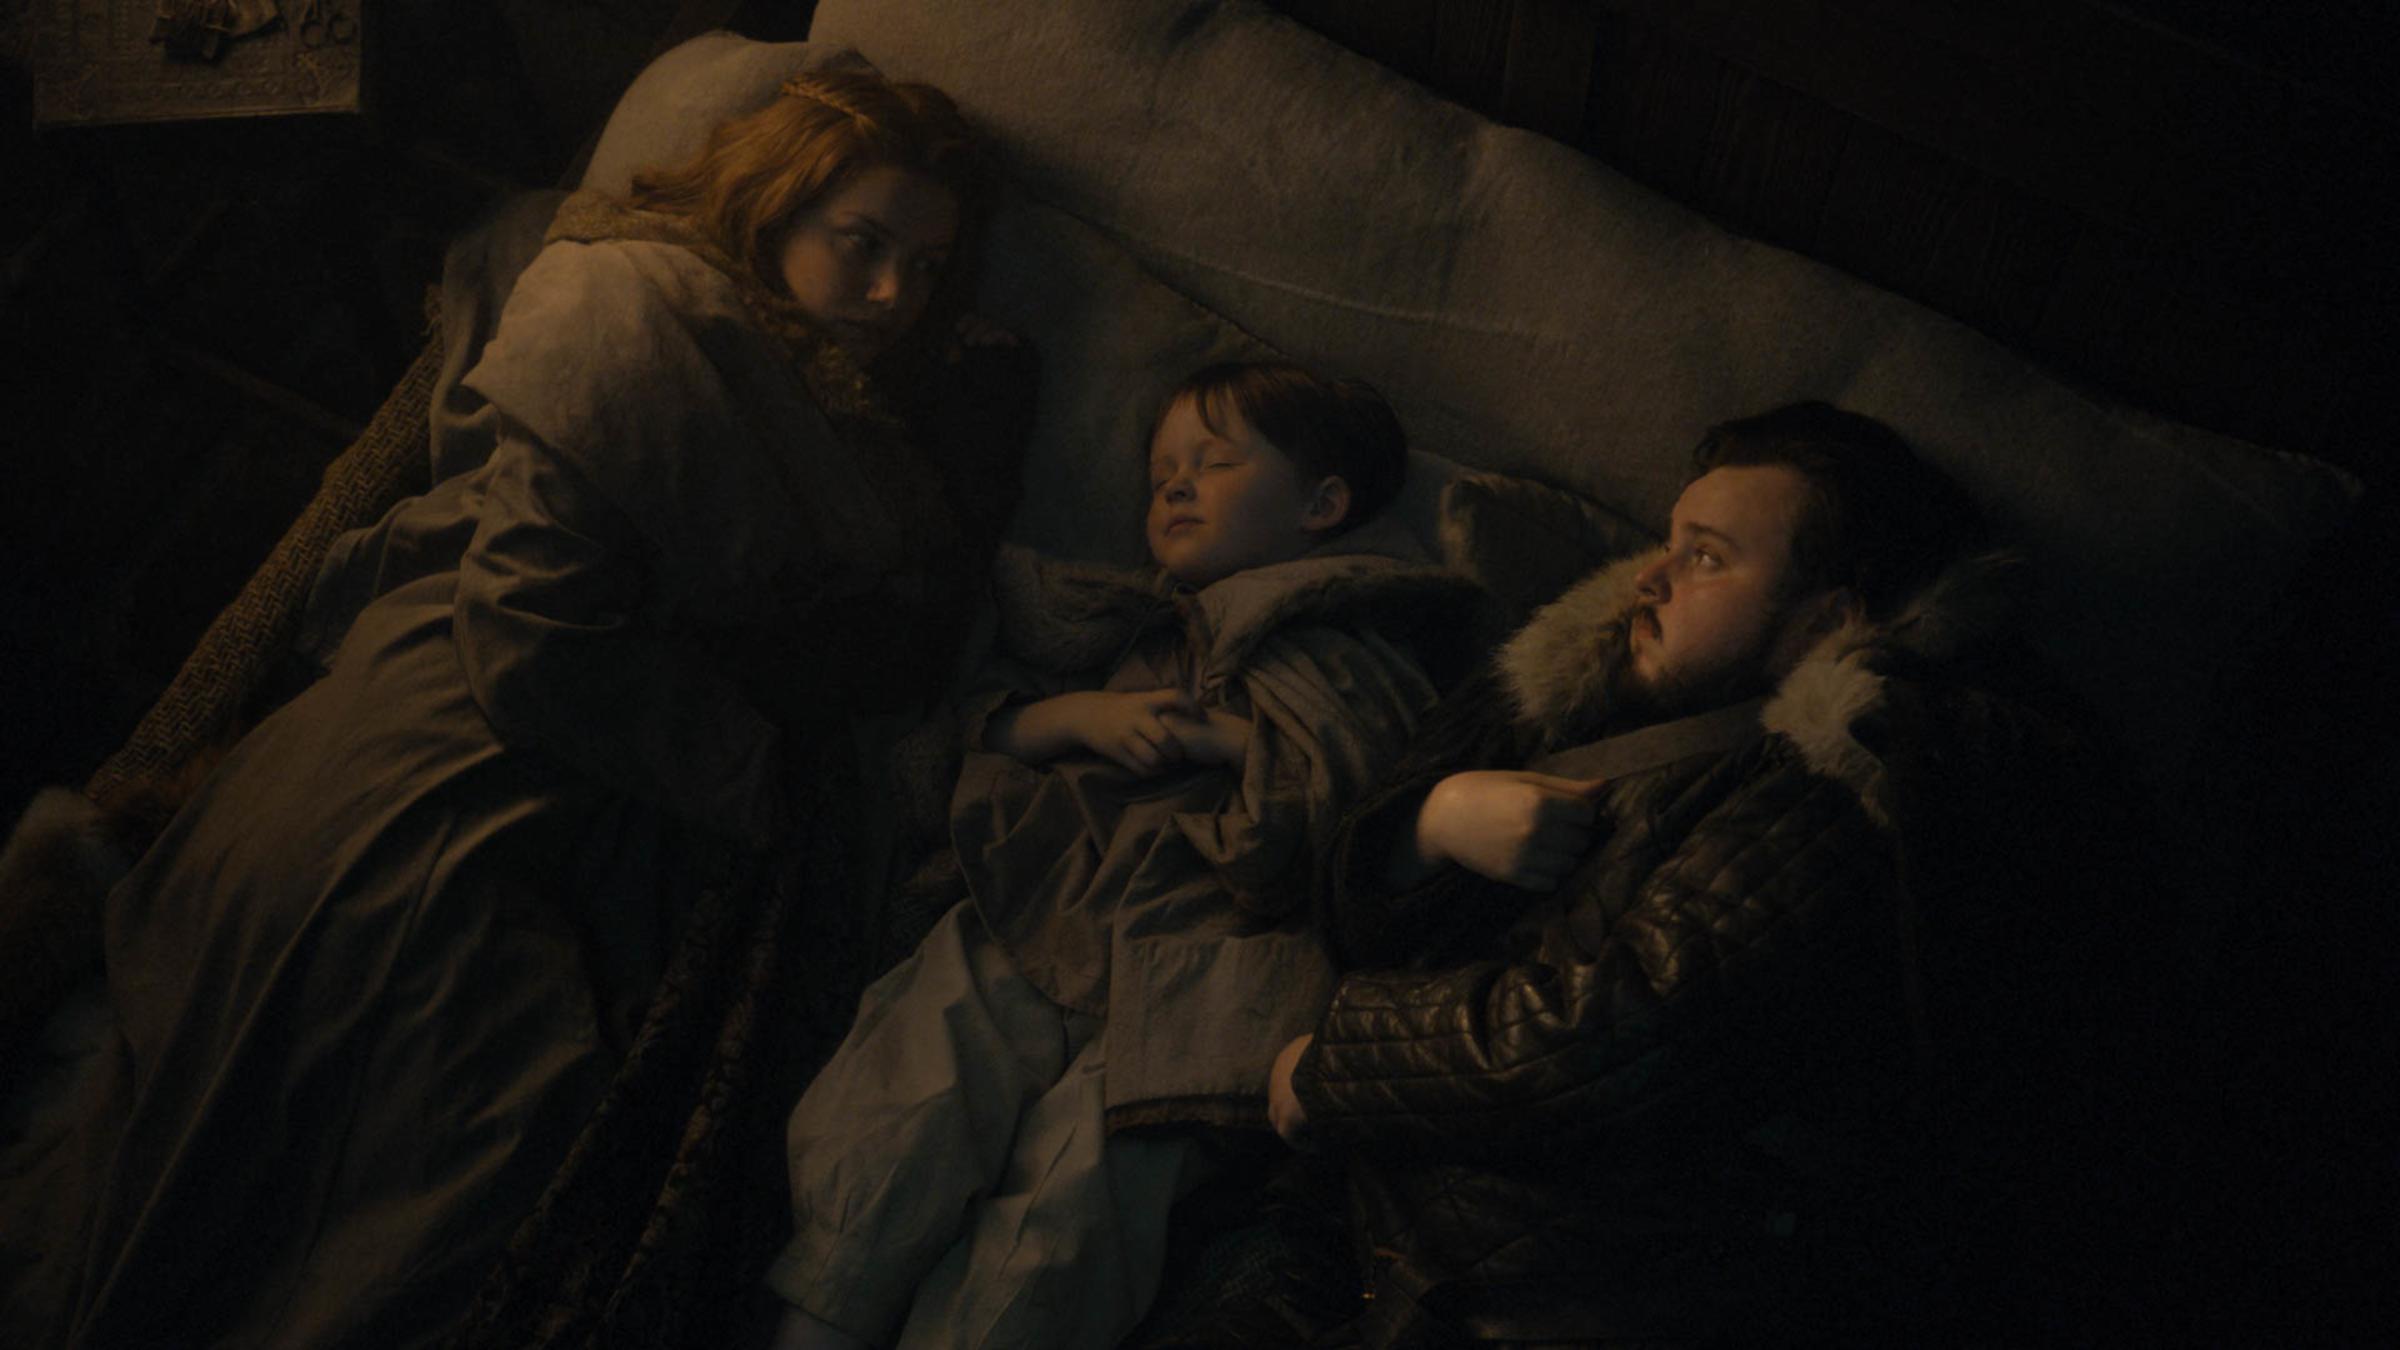 Hannah Murray as Gilly and John Bradley as Samwell Tarly in 'Game of Thrones.'